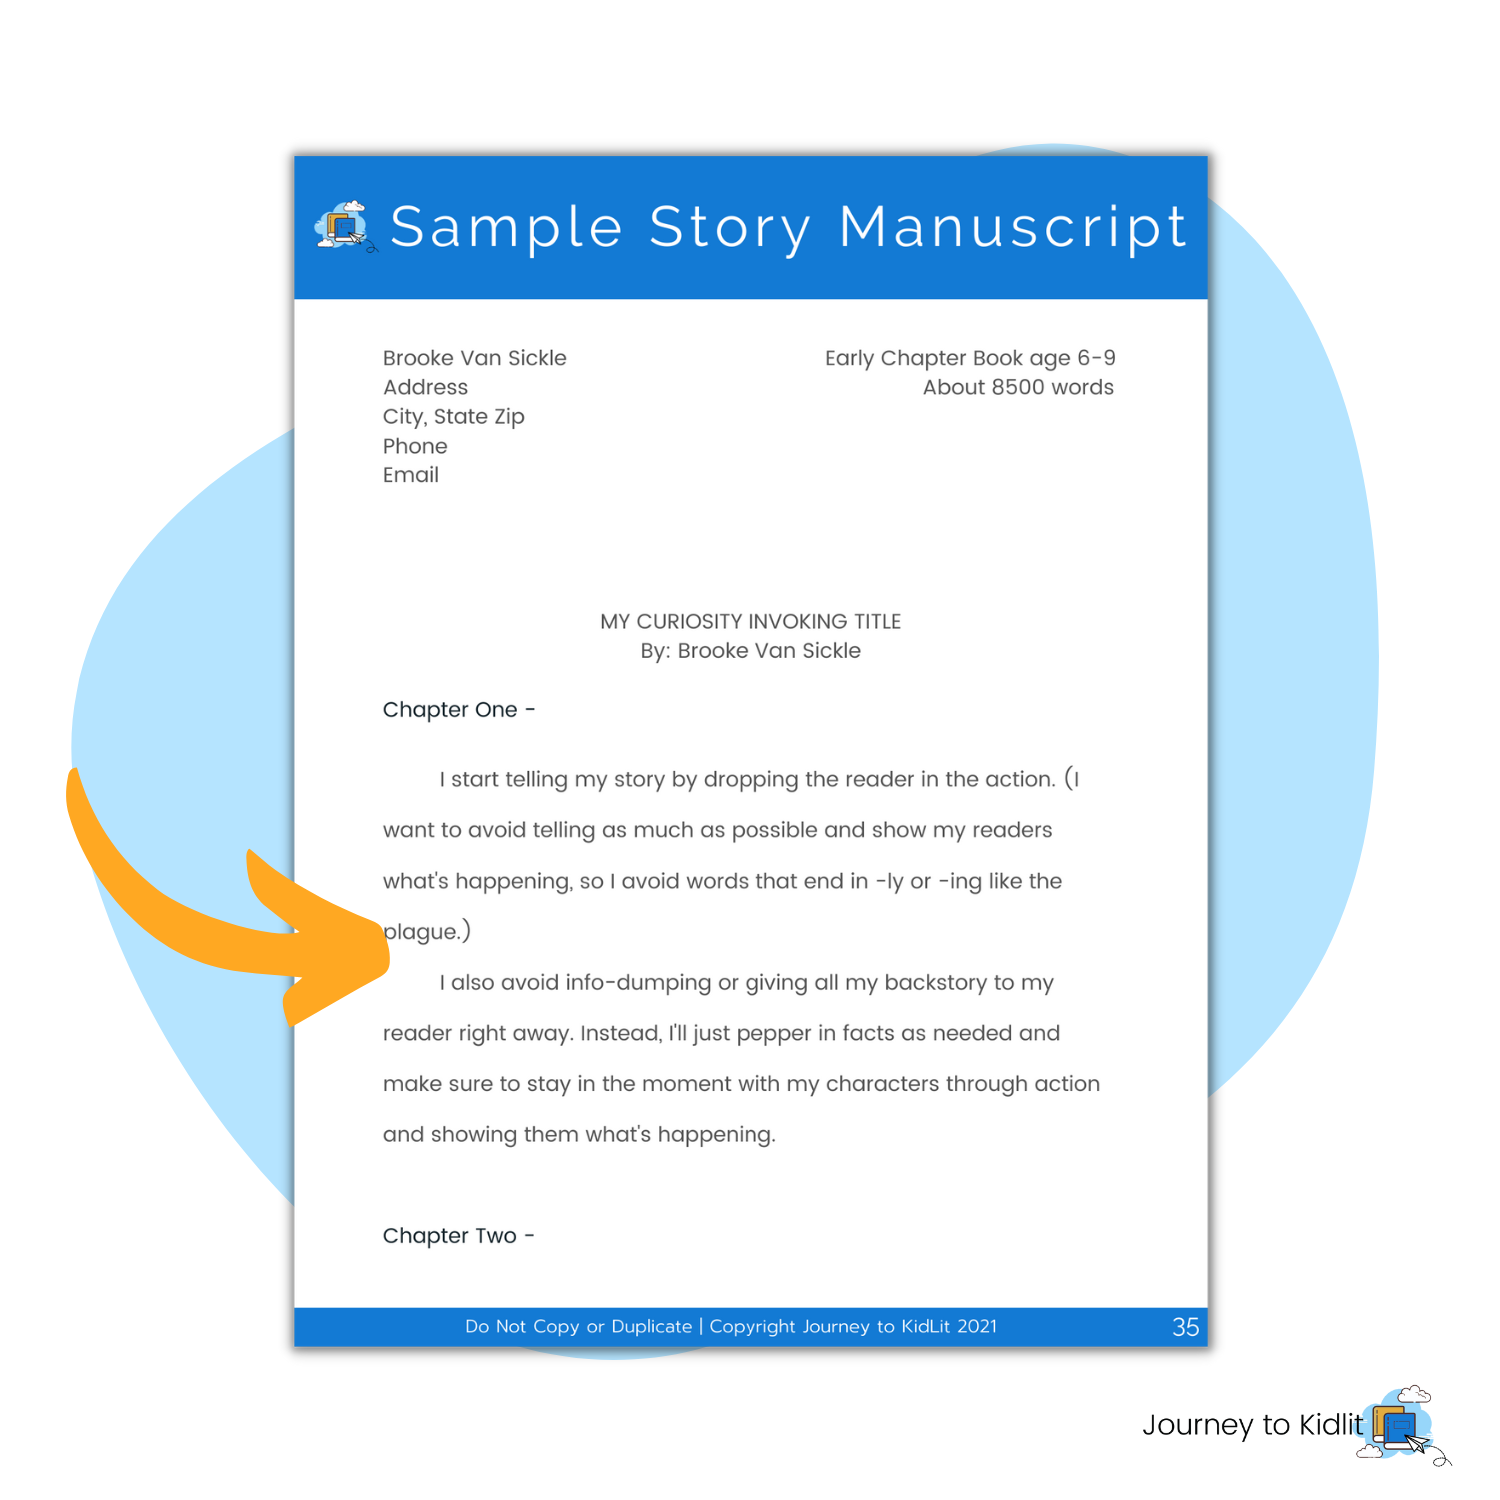 Sample story manuscript for Children's Book Writers to format their stories.